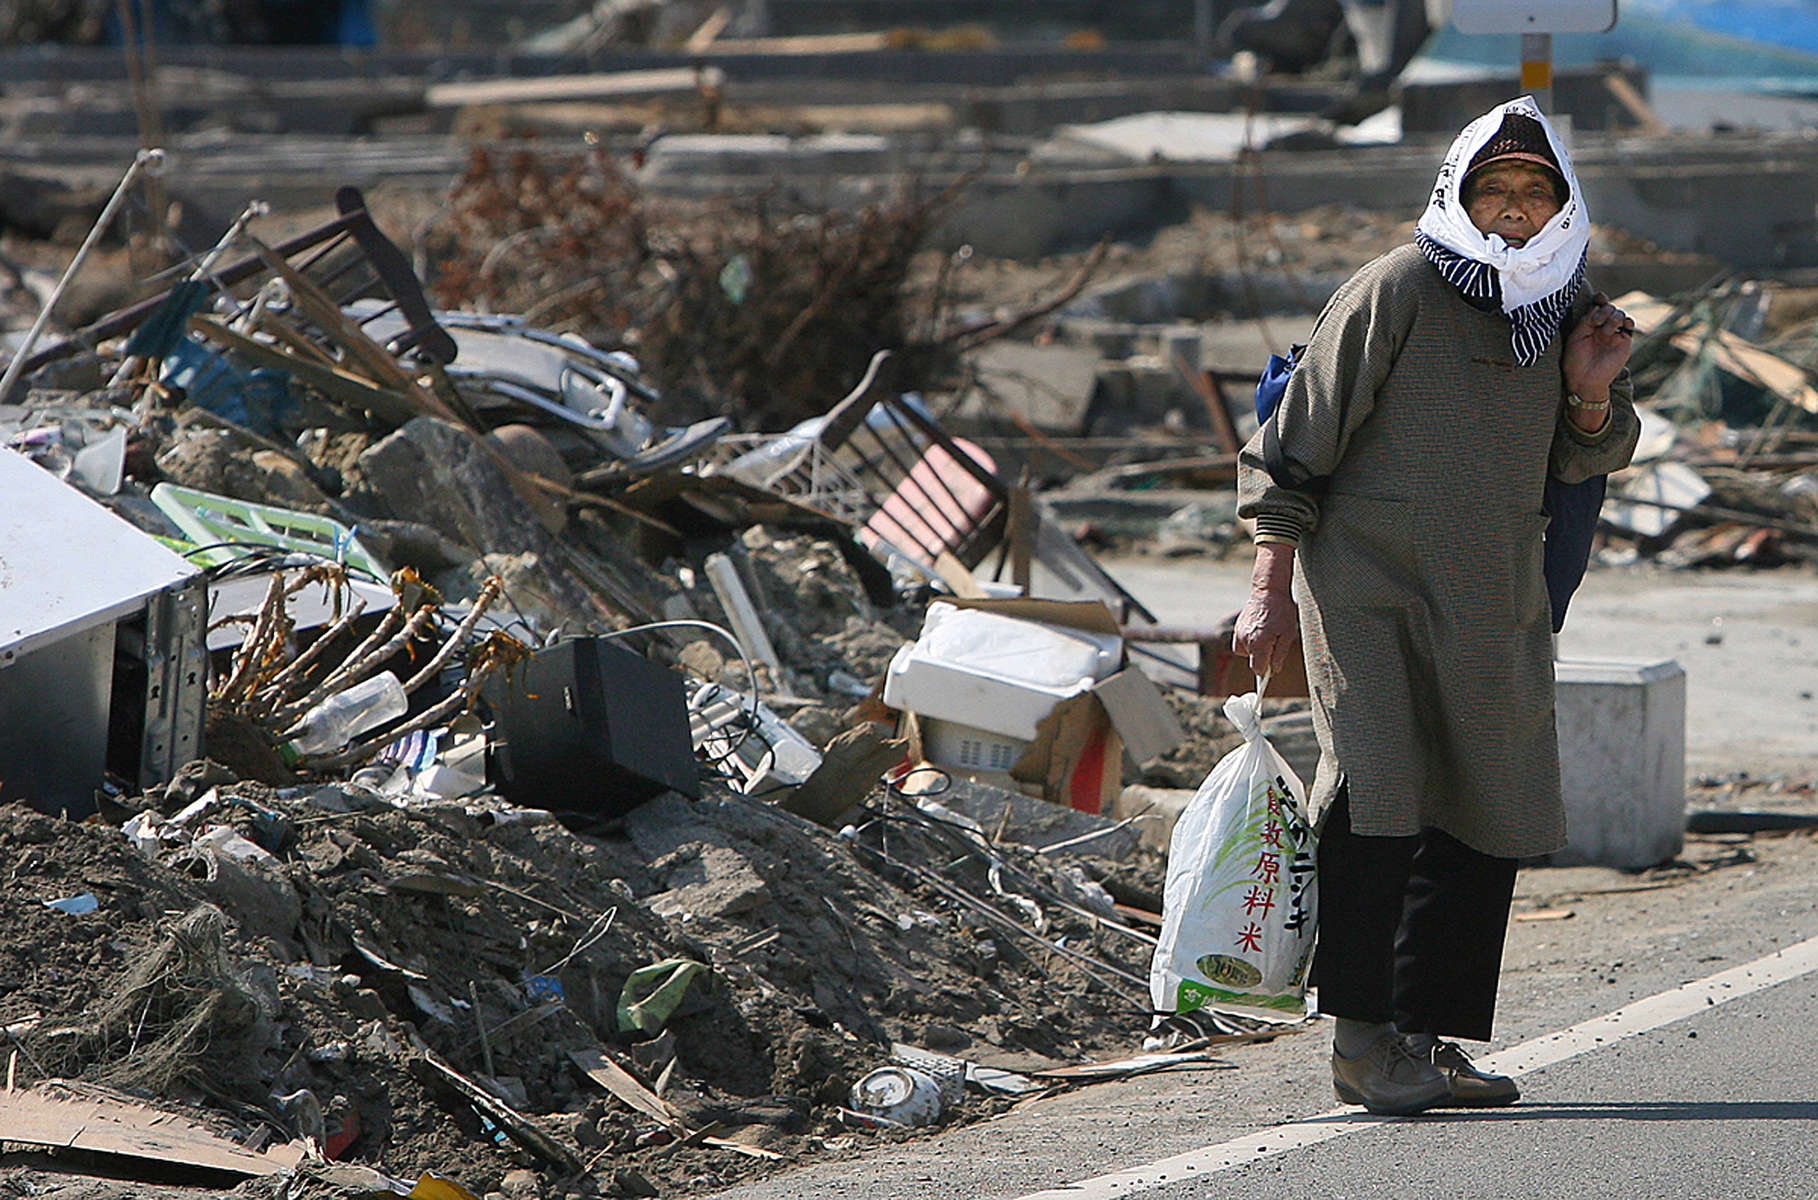 A woman carries supplies she bought at a convenience store miles away from her destroyed home in Shichigahama, a fishing town of northern Sendai, Japan. (The Press-Enterprise/ Mark Zaleski)